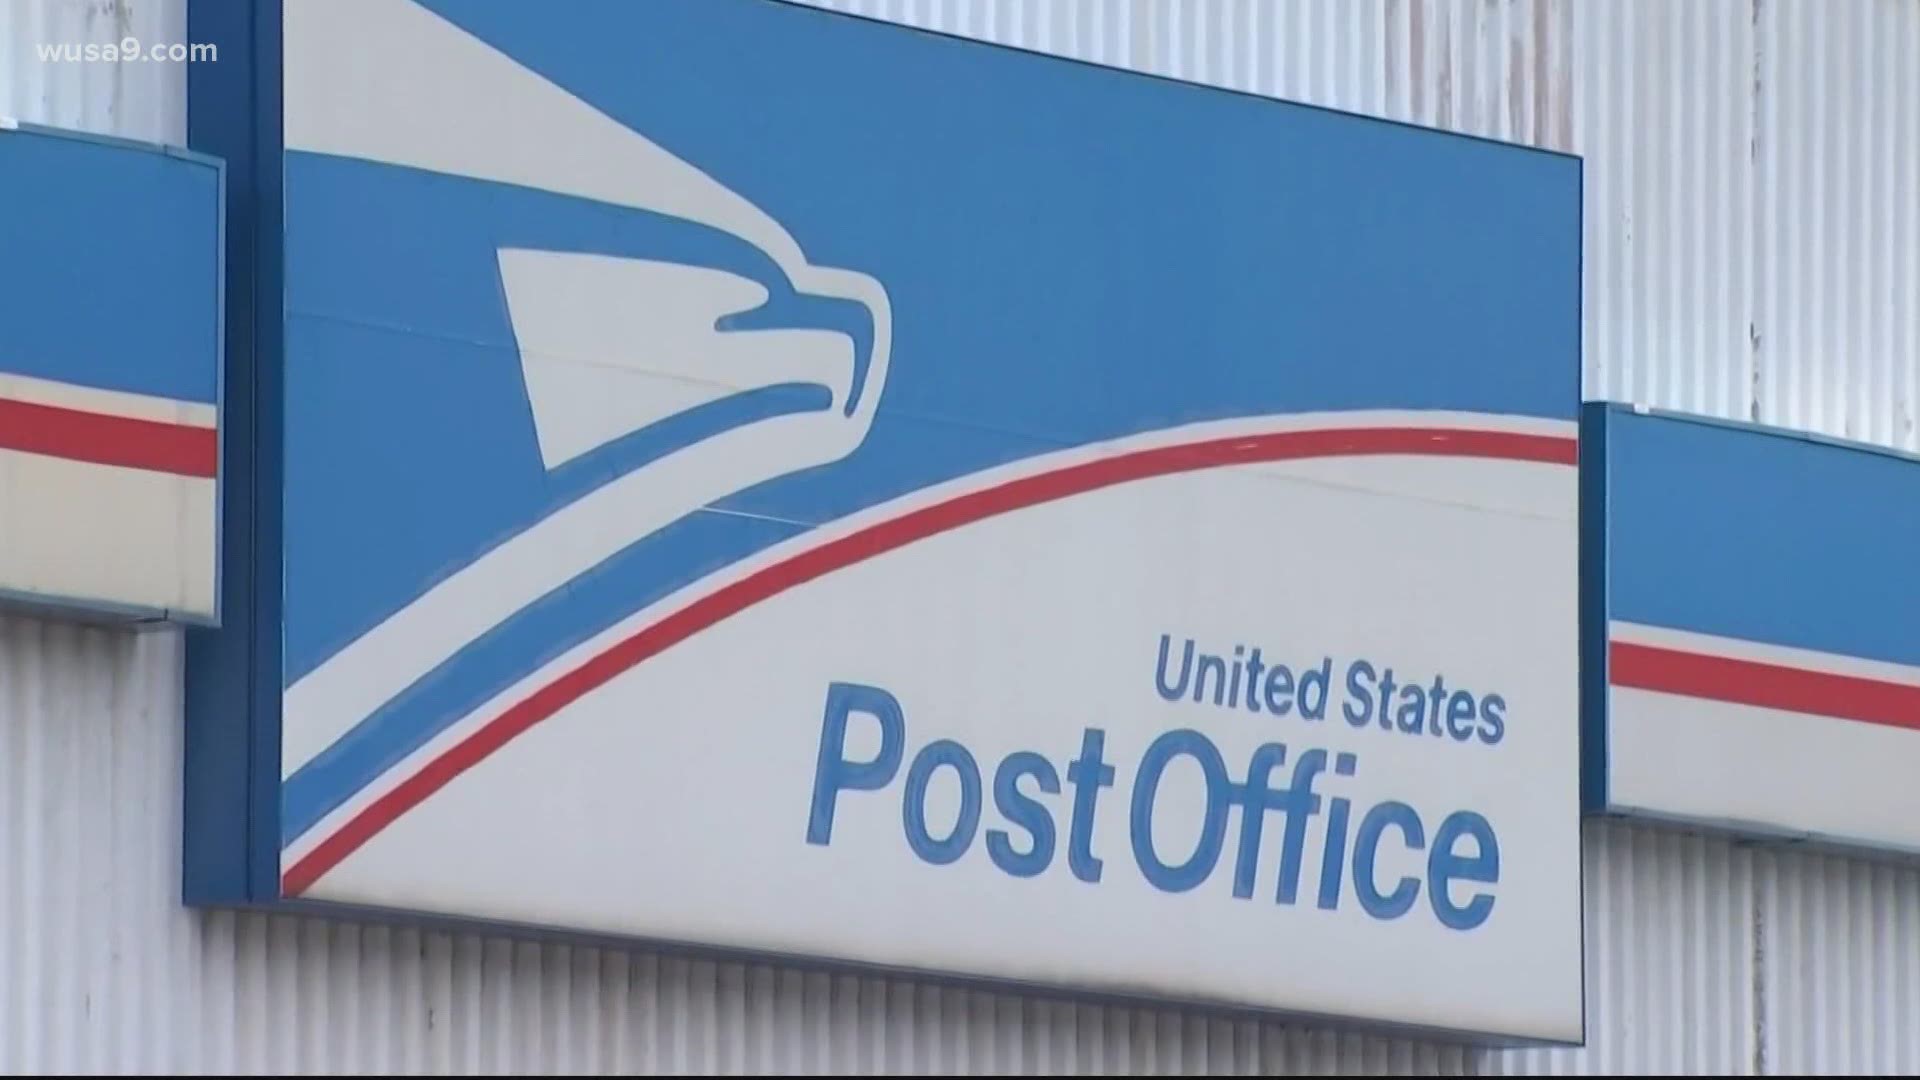 A letter carrier in Prince William County is recovering after police said he was shot delivering mail in Daley City Monday around 5pm.